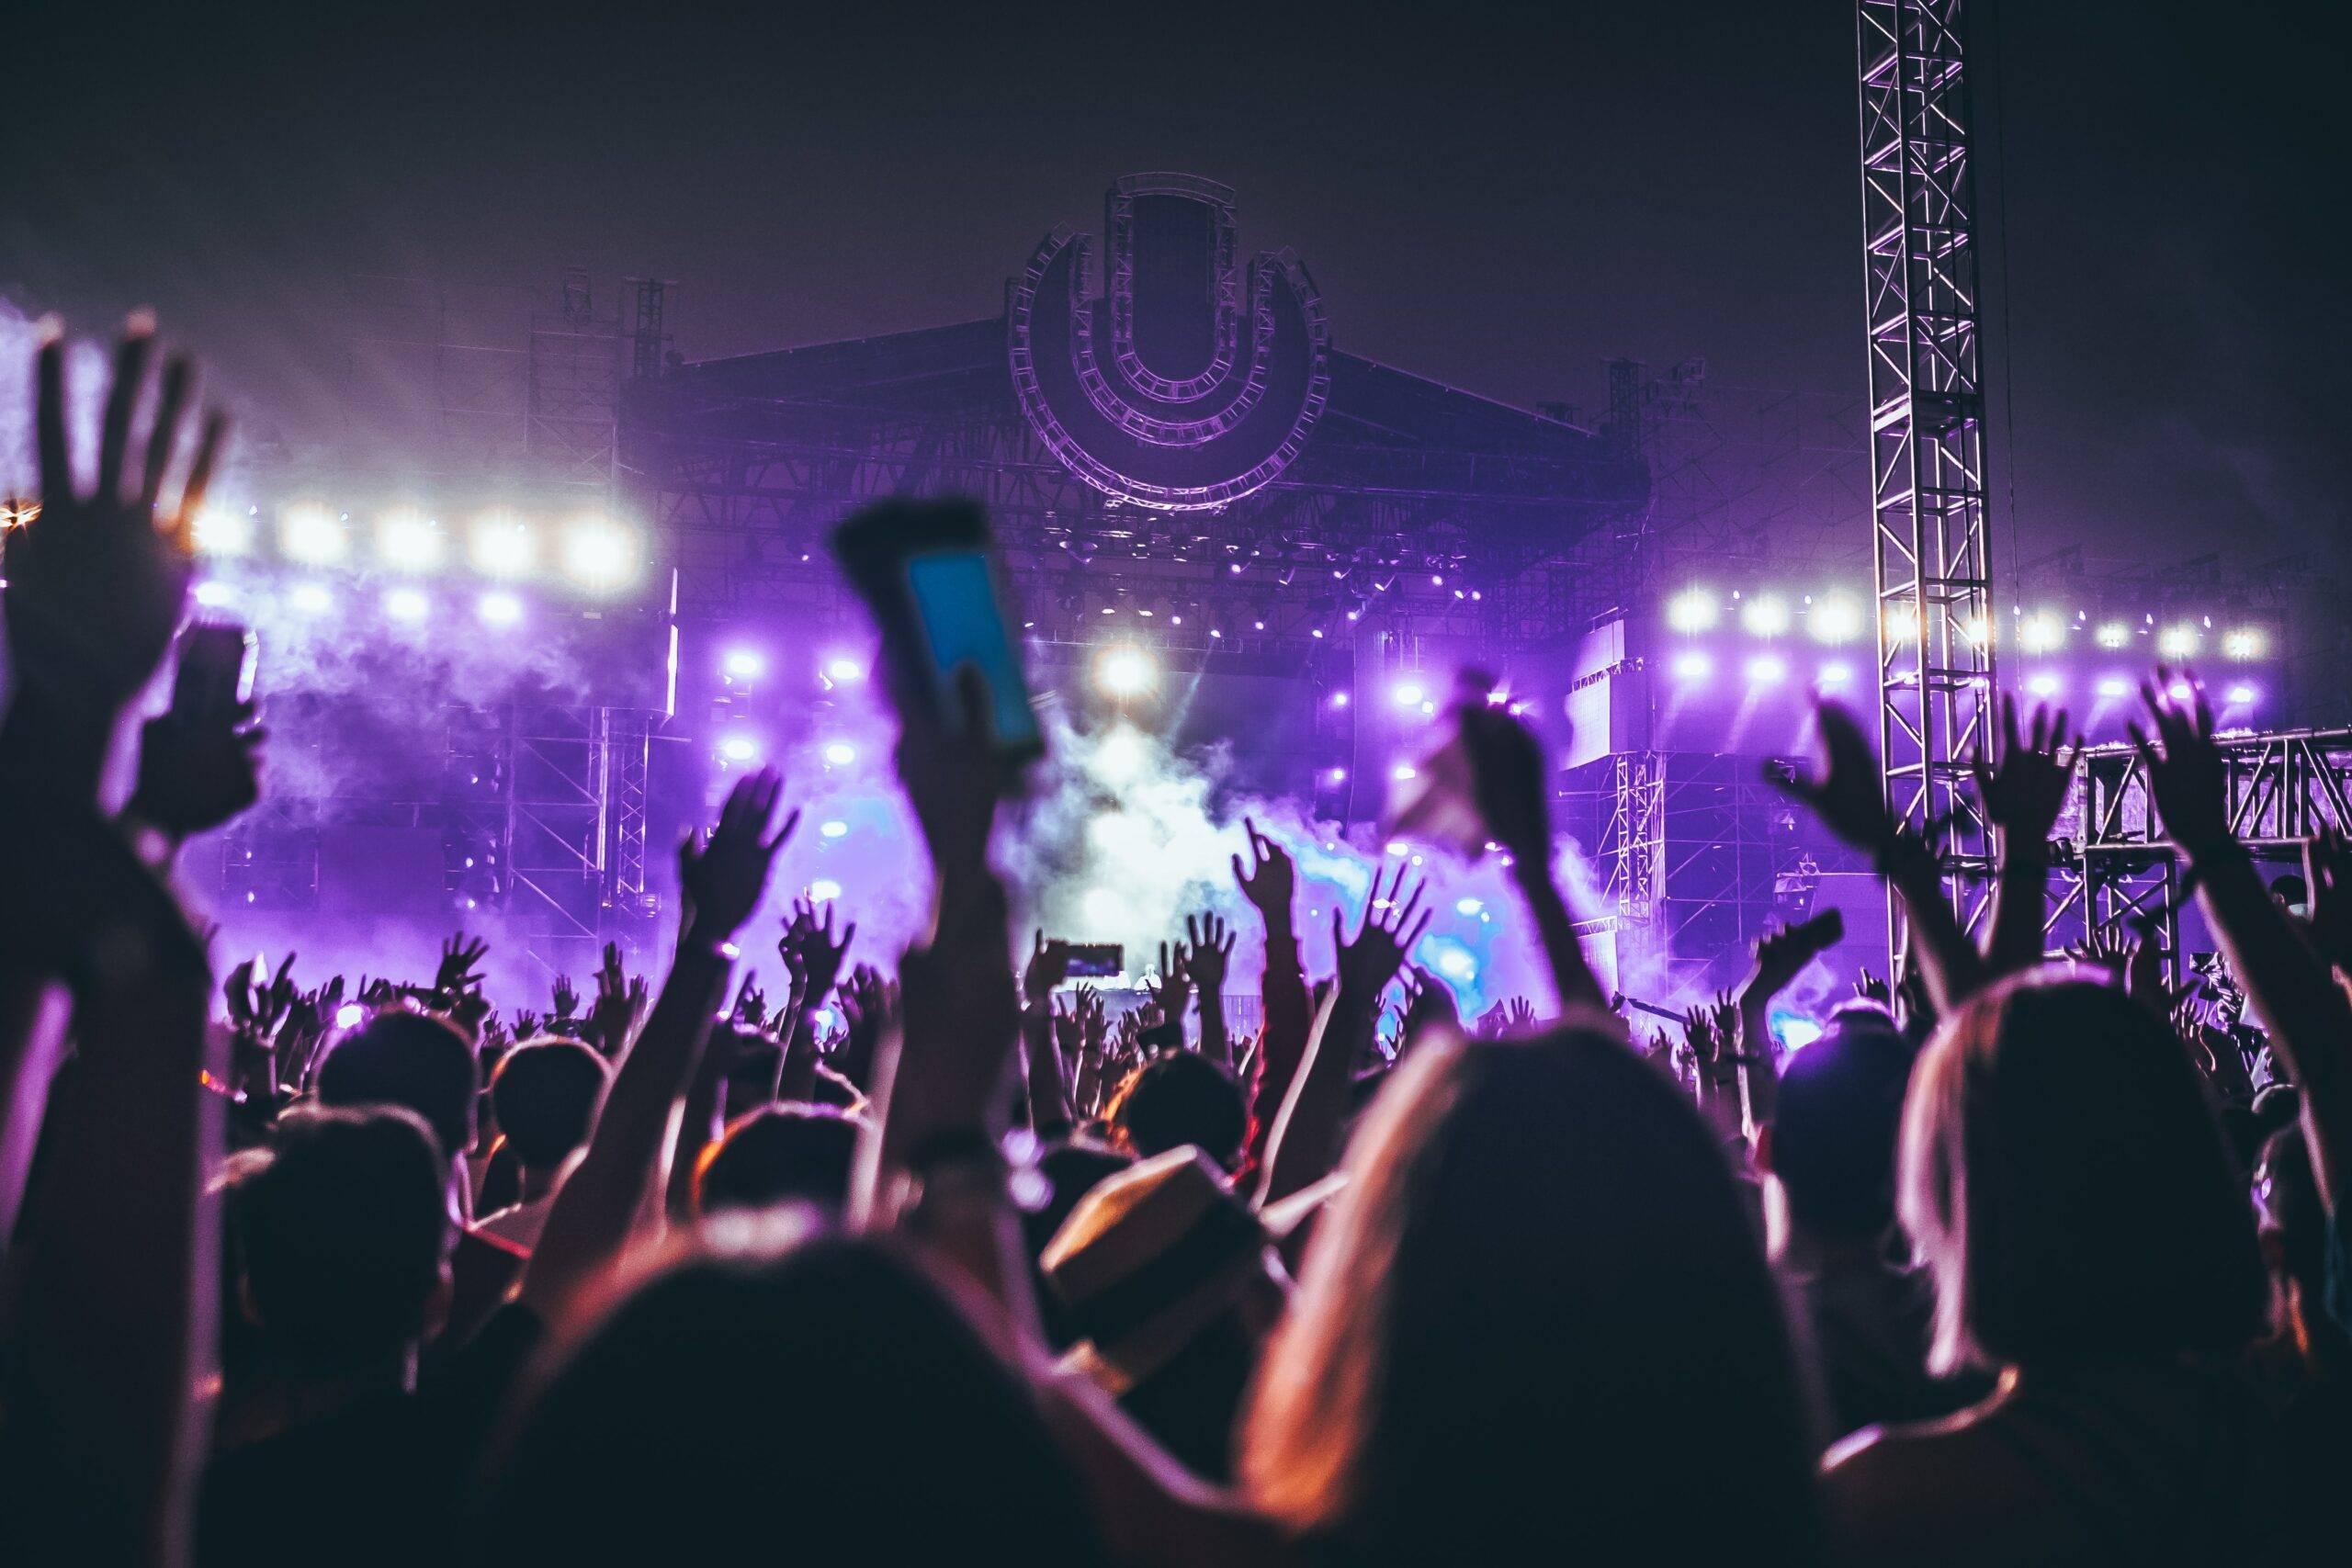 Festivals, mergers and COVID-19: An interview with Zack Sabban, CEO at Festicket